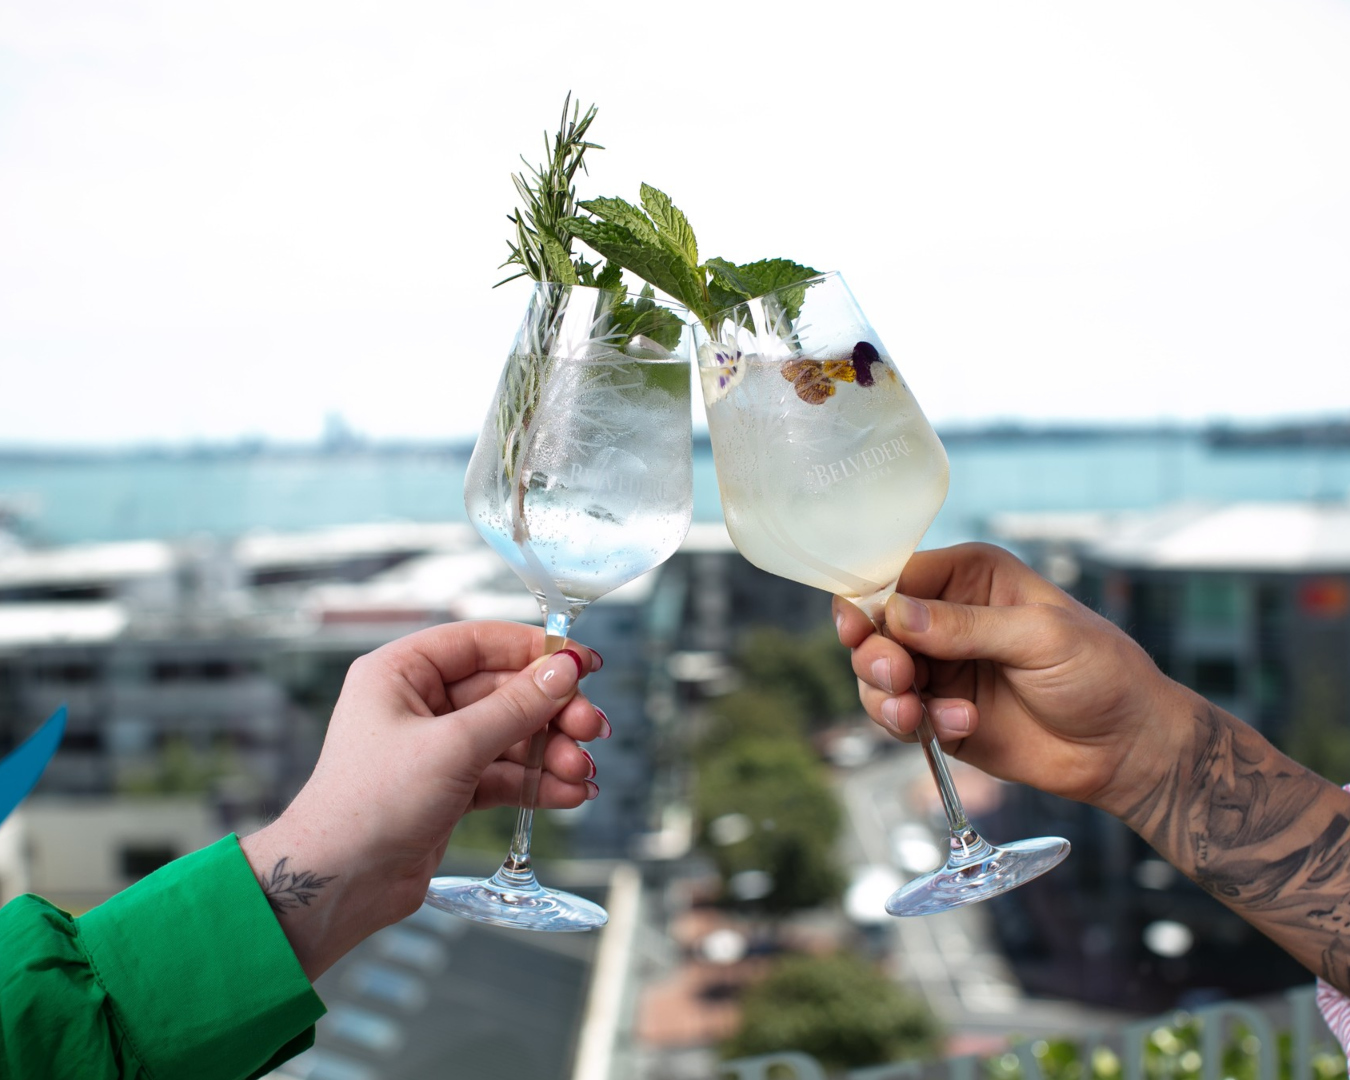 A couple clink glasses filled with cocktails on a rooftop.